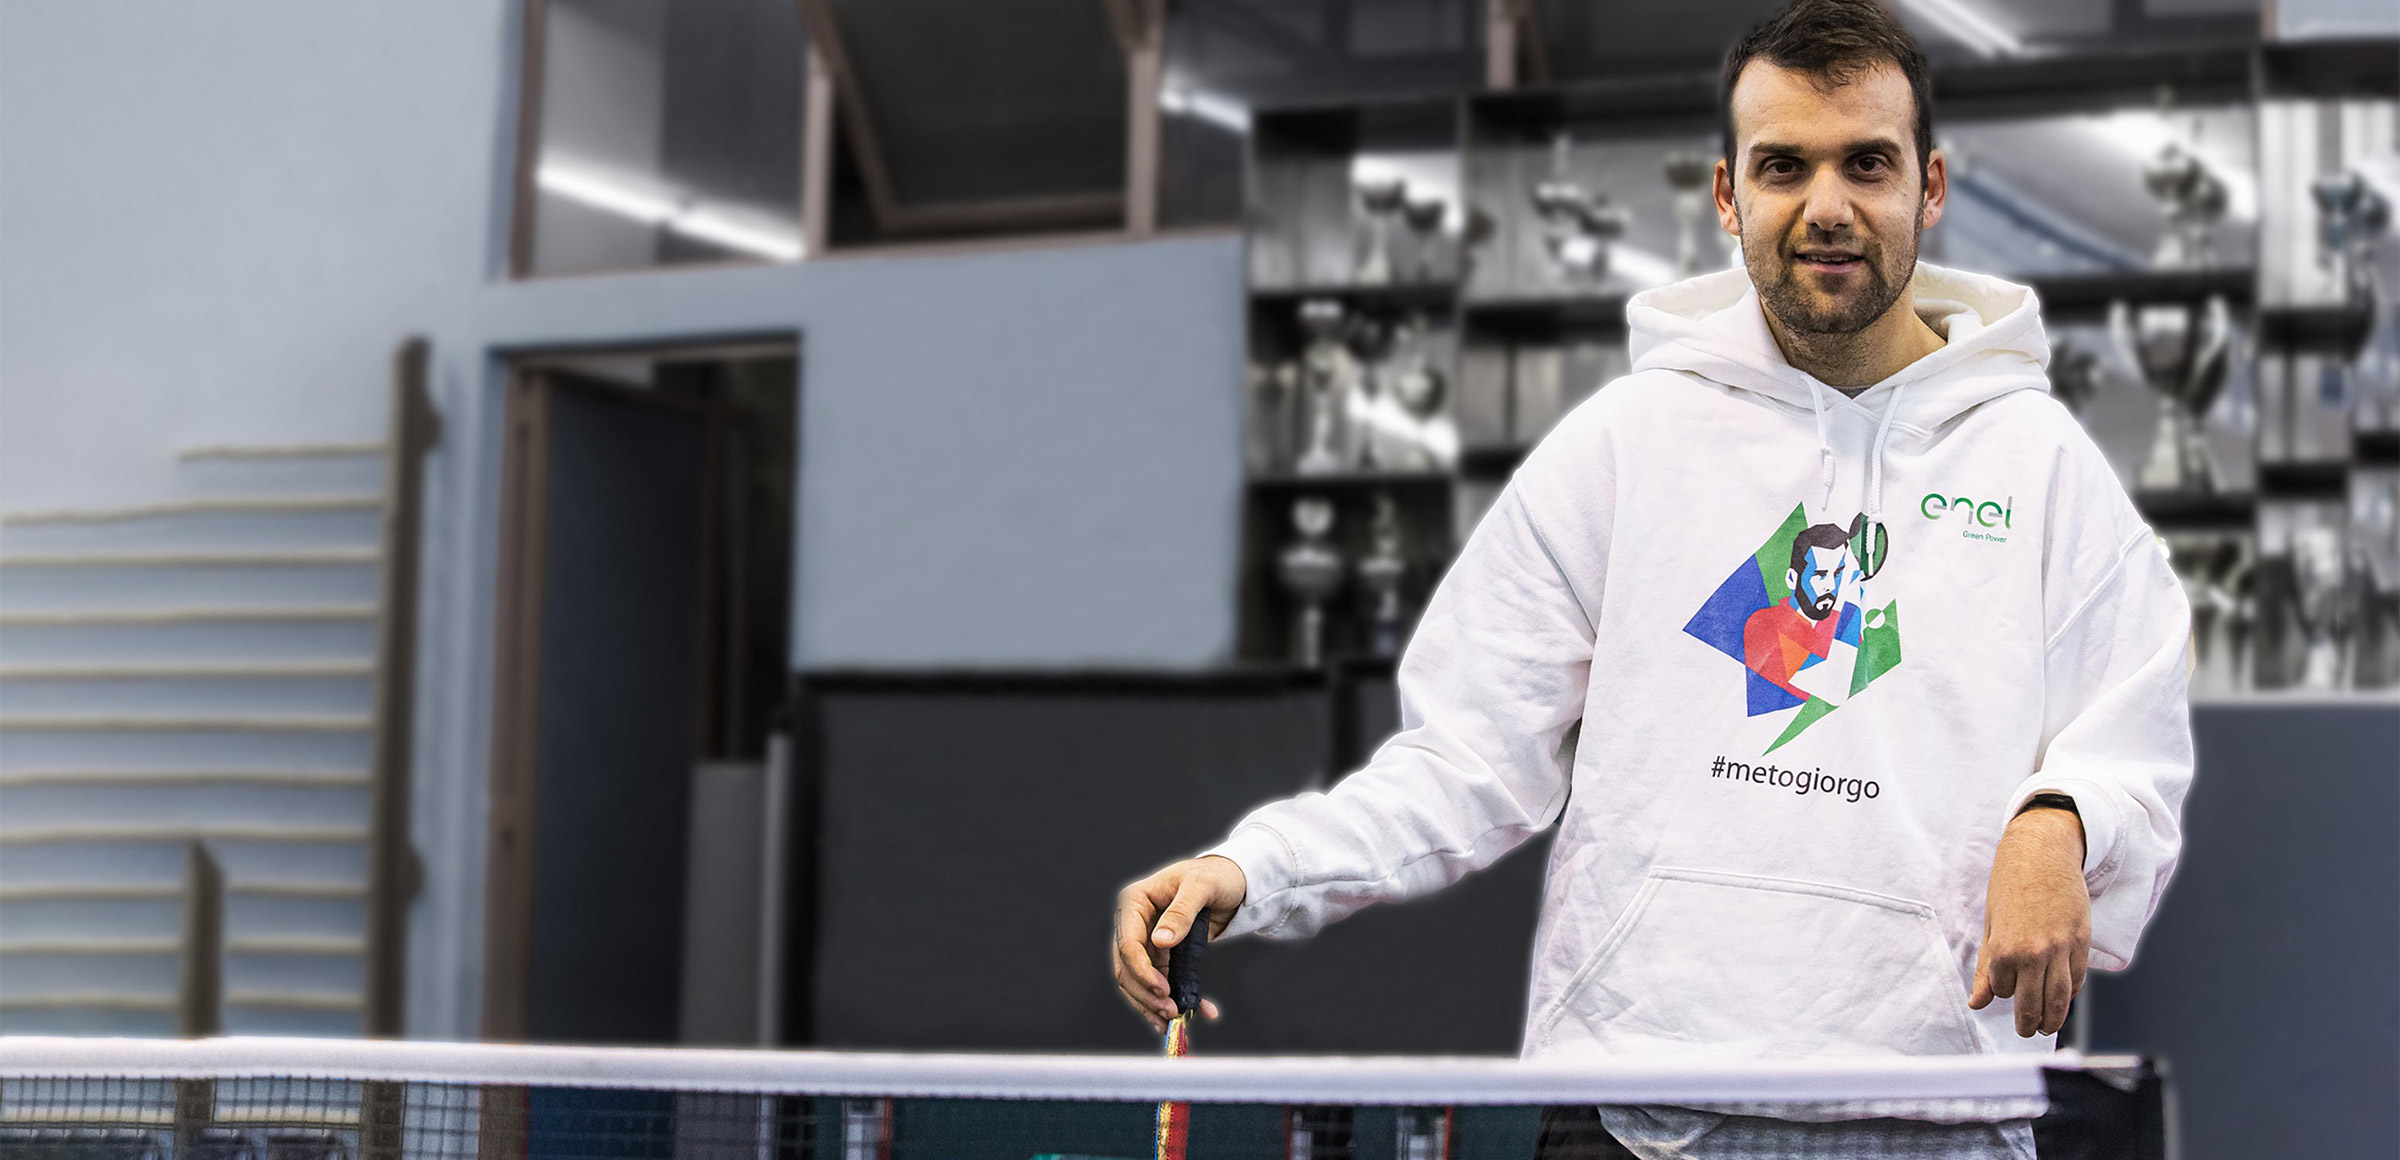 Giorgos Mouchthis, a table tennis champion and an inspiration to us all, Enel Green Power